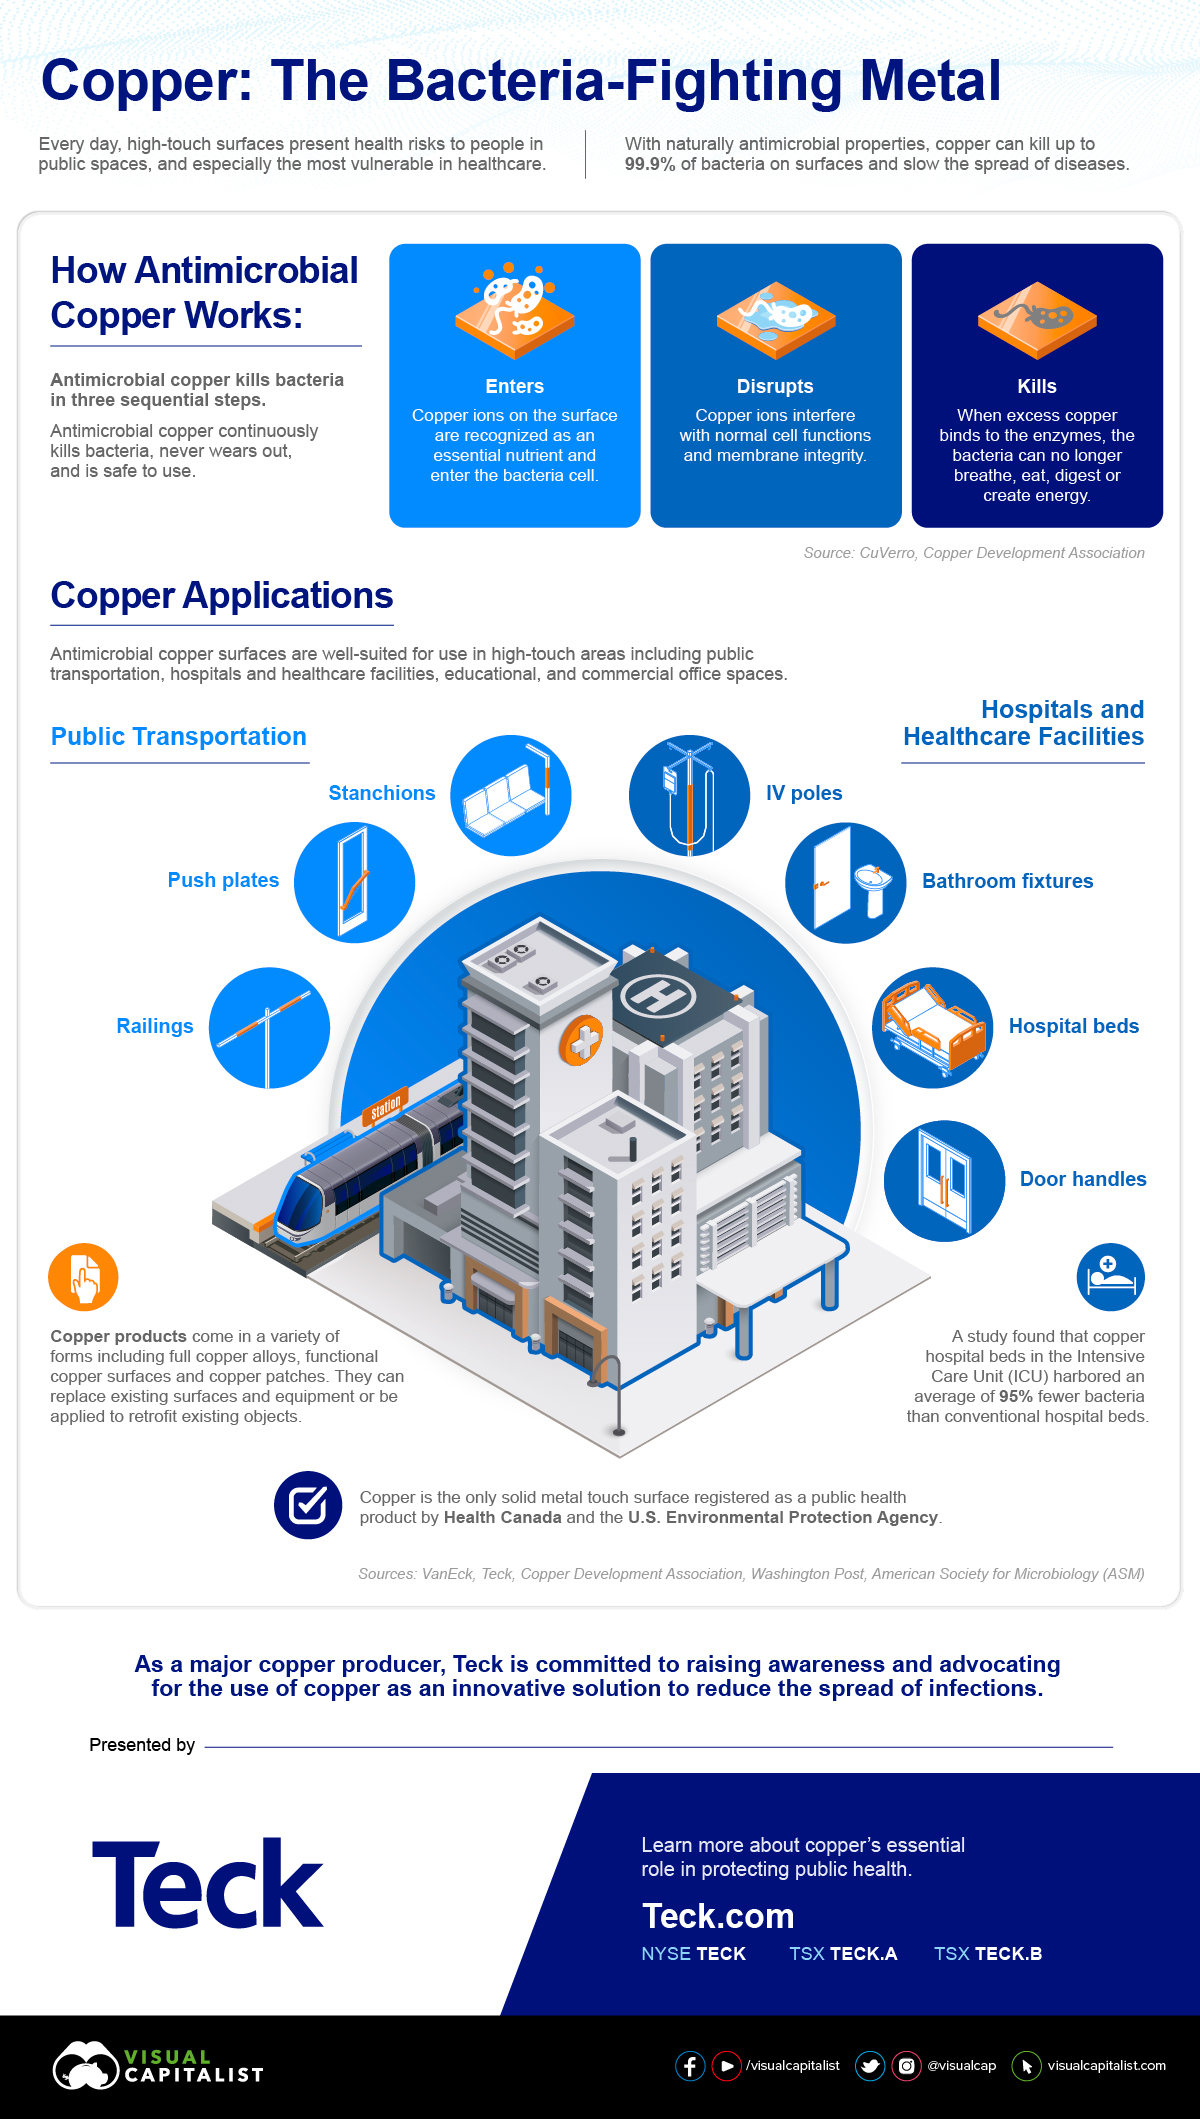 Copper’s Essential Role in Protecting Public Health